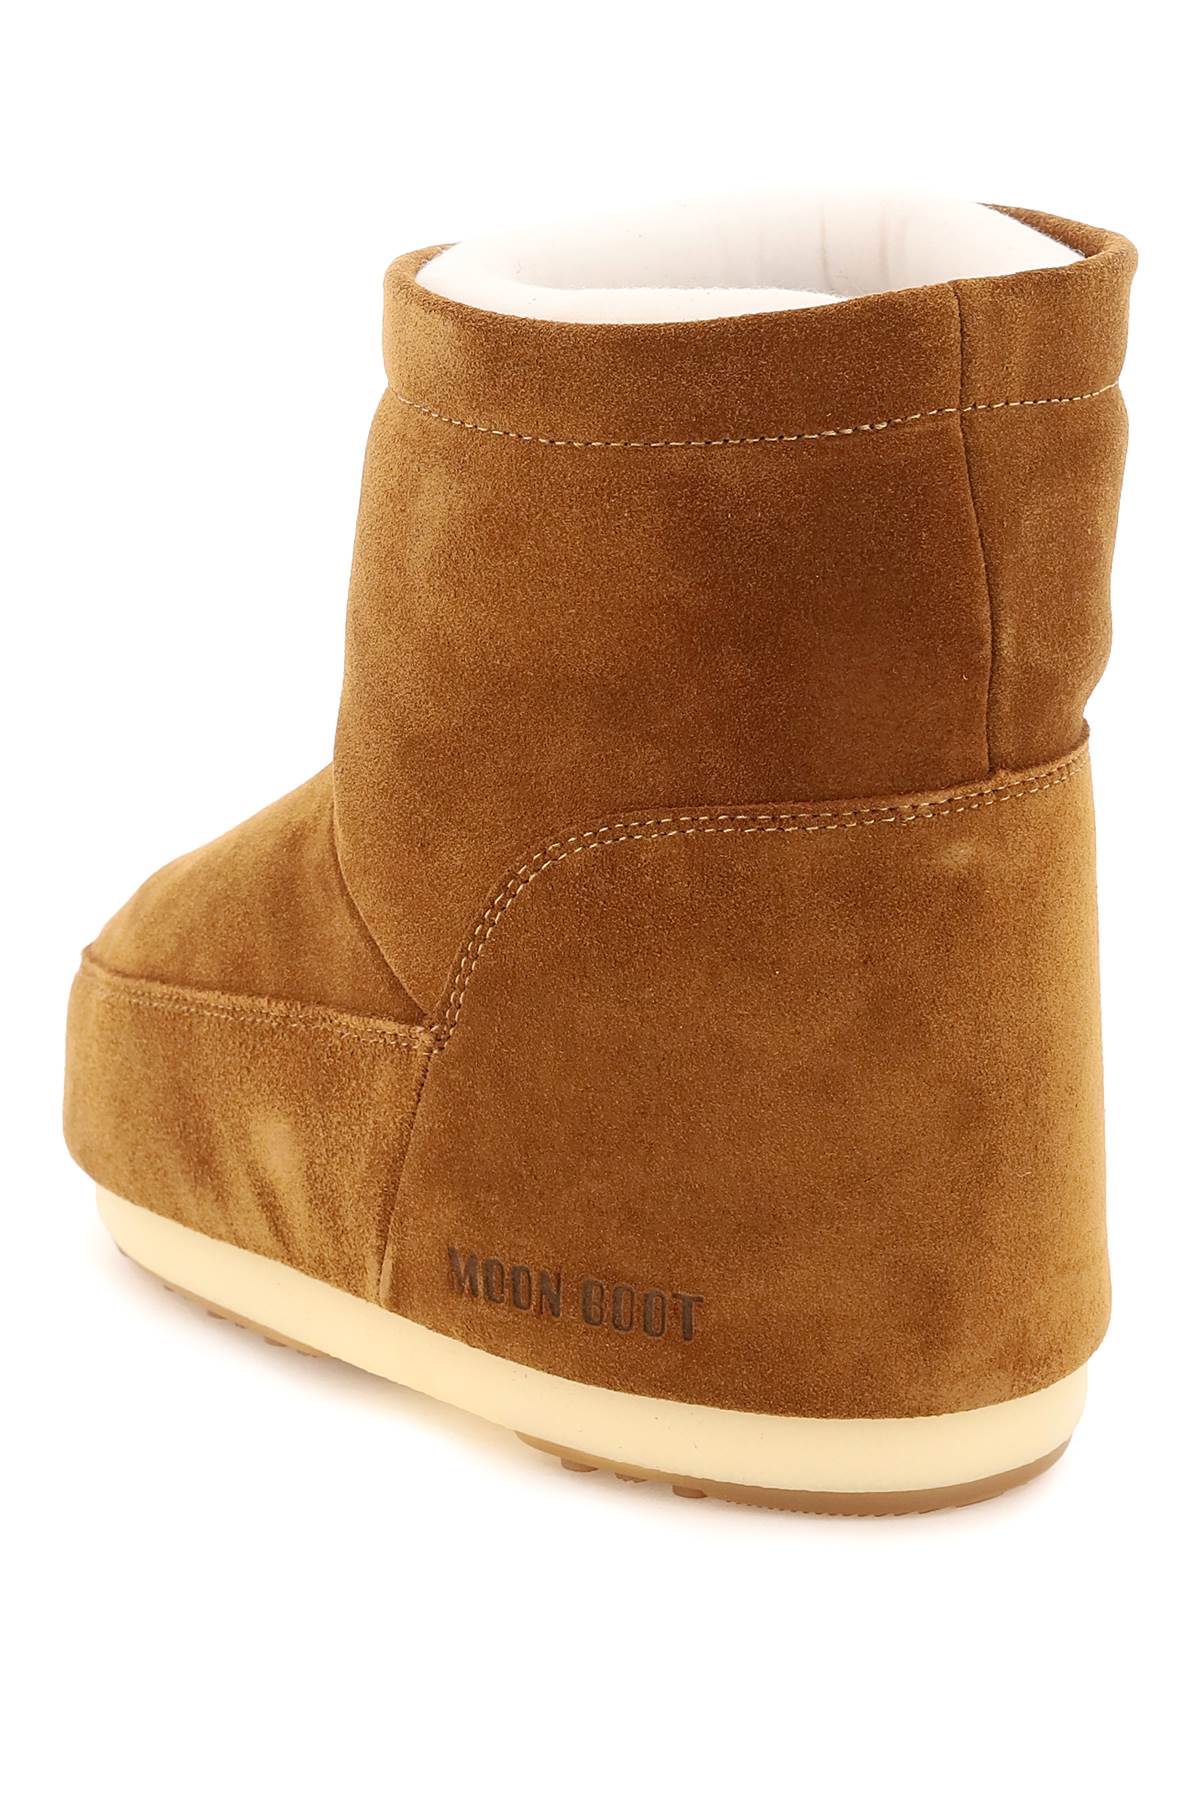 Moon boot icon low suede snow boots-2